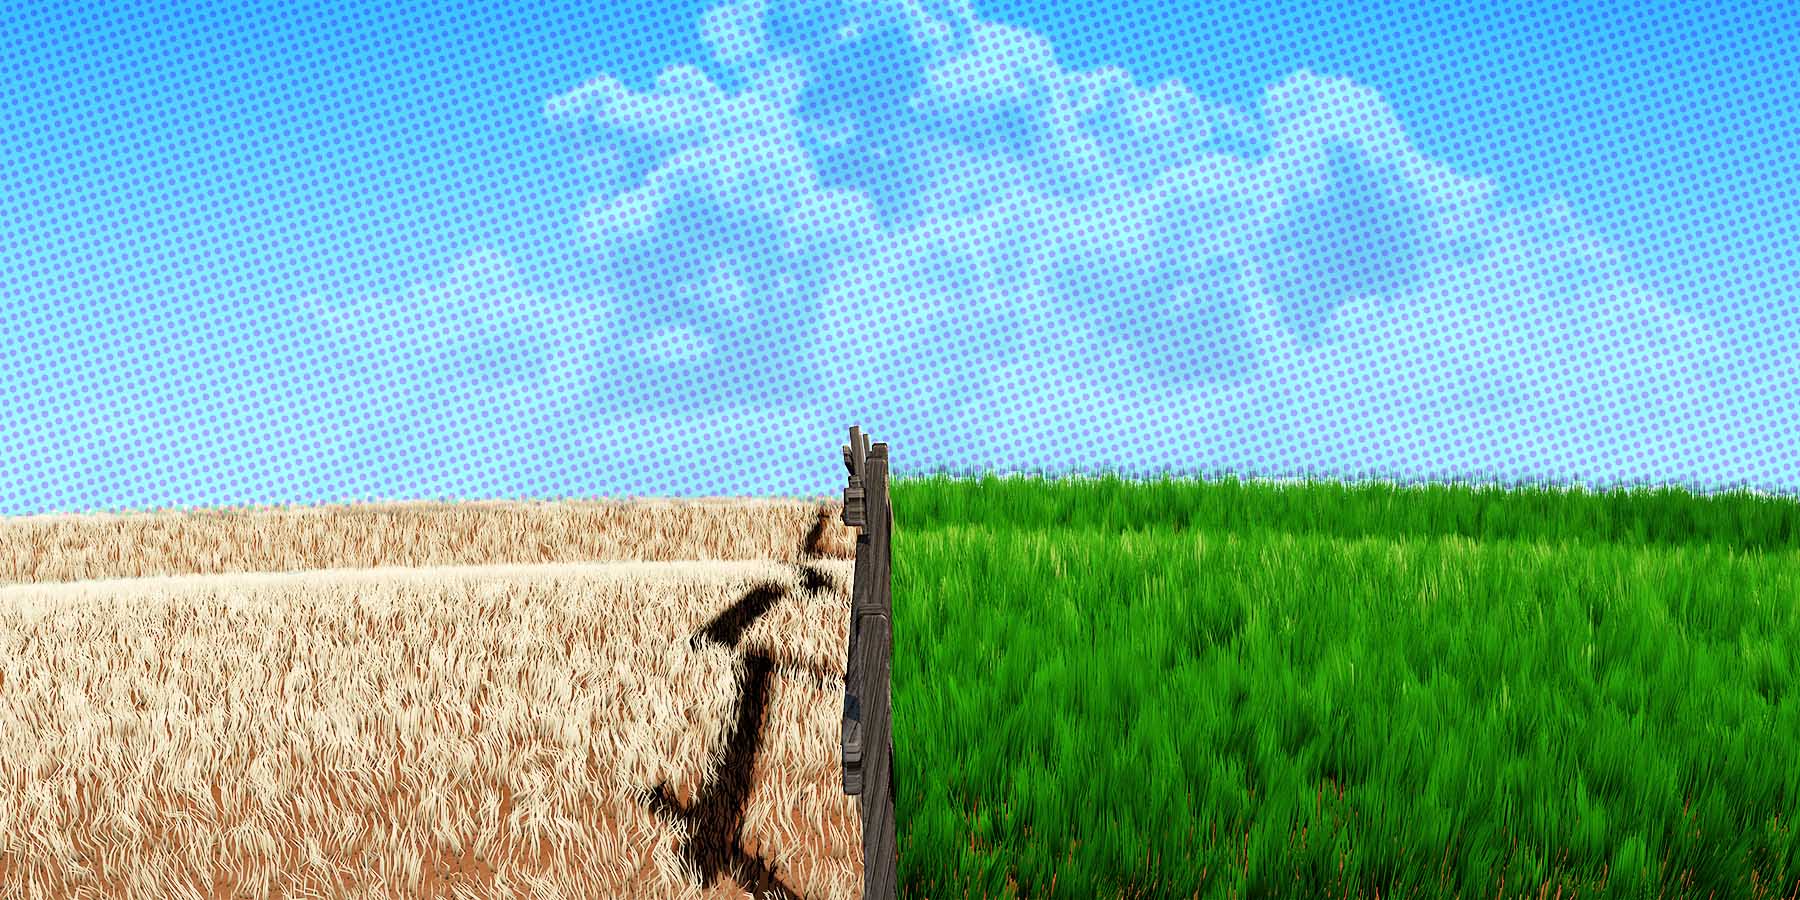 Ask a Freelancer: Is the Grass Always Greener on the Other Side of the Church and State Wall?